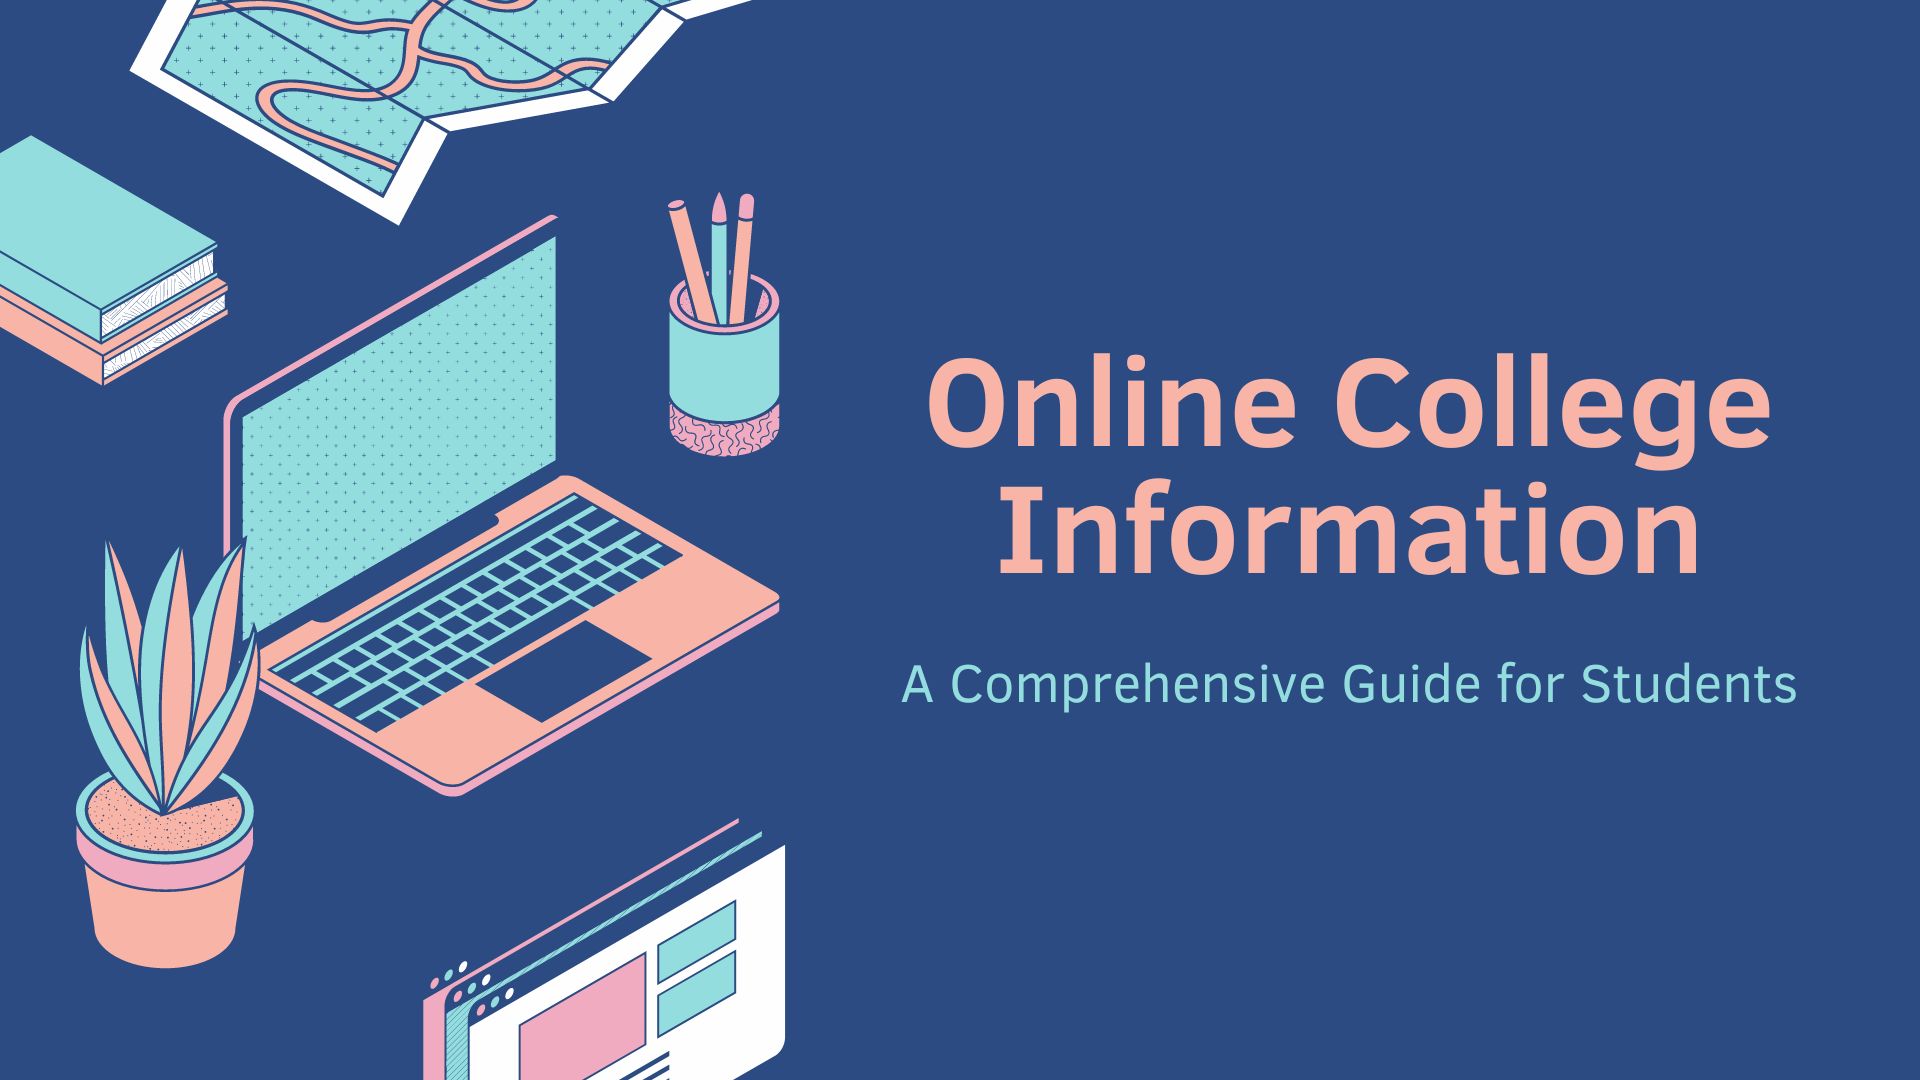 Online College Information: A Comprehensive Guide for Students